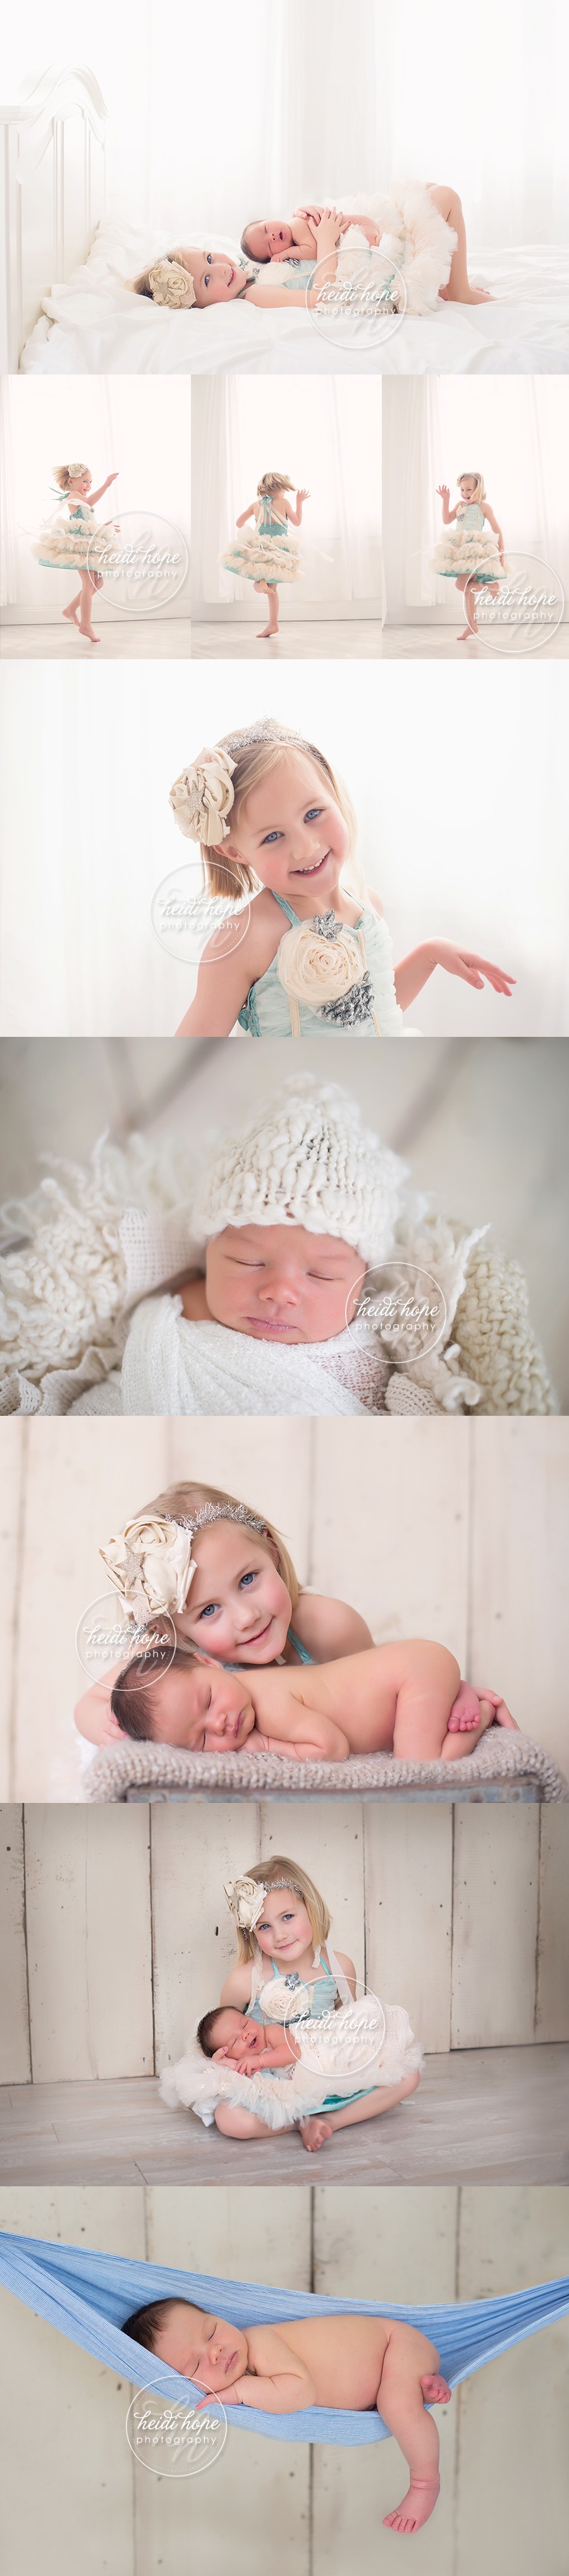 newborn baby boy and big sister sibling portrait photographer